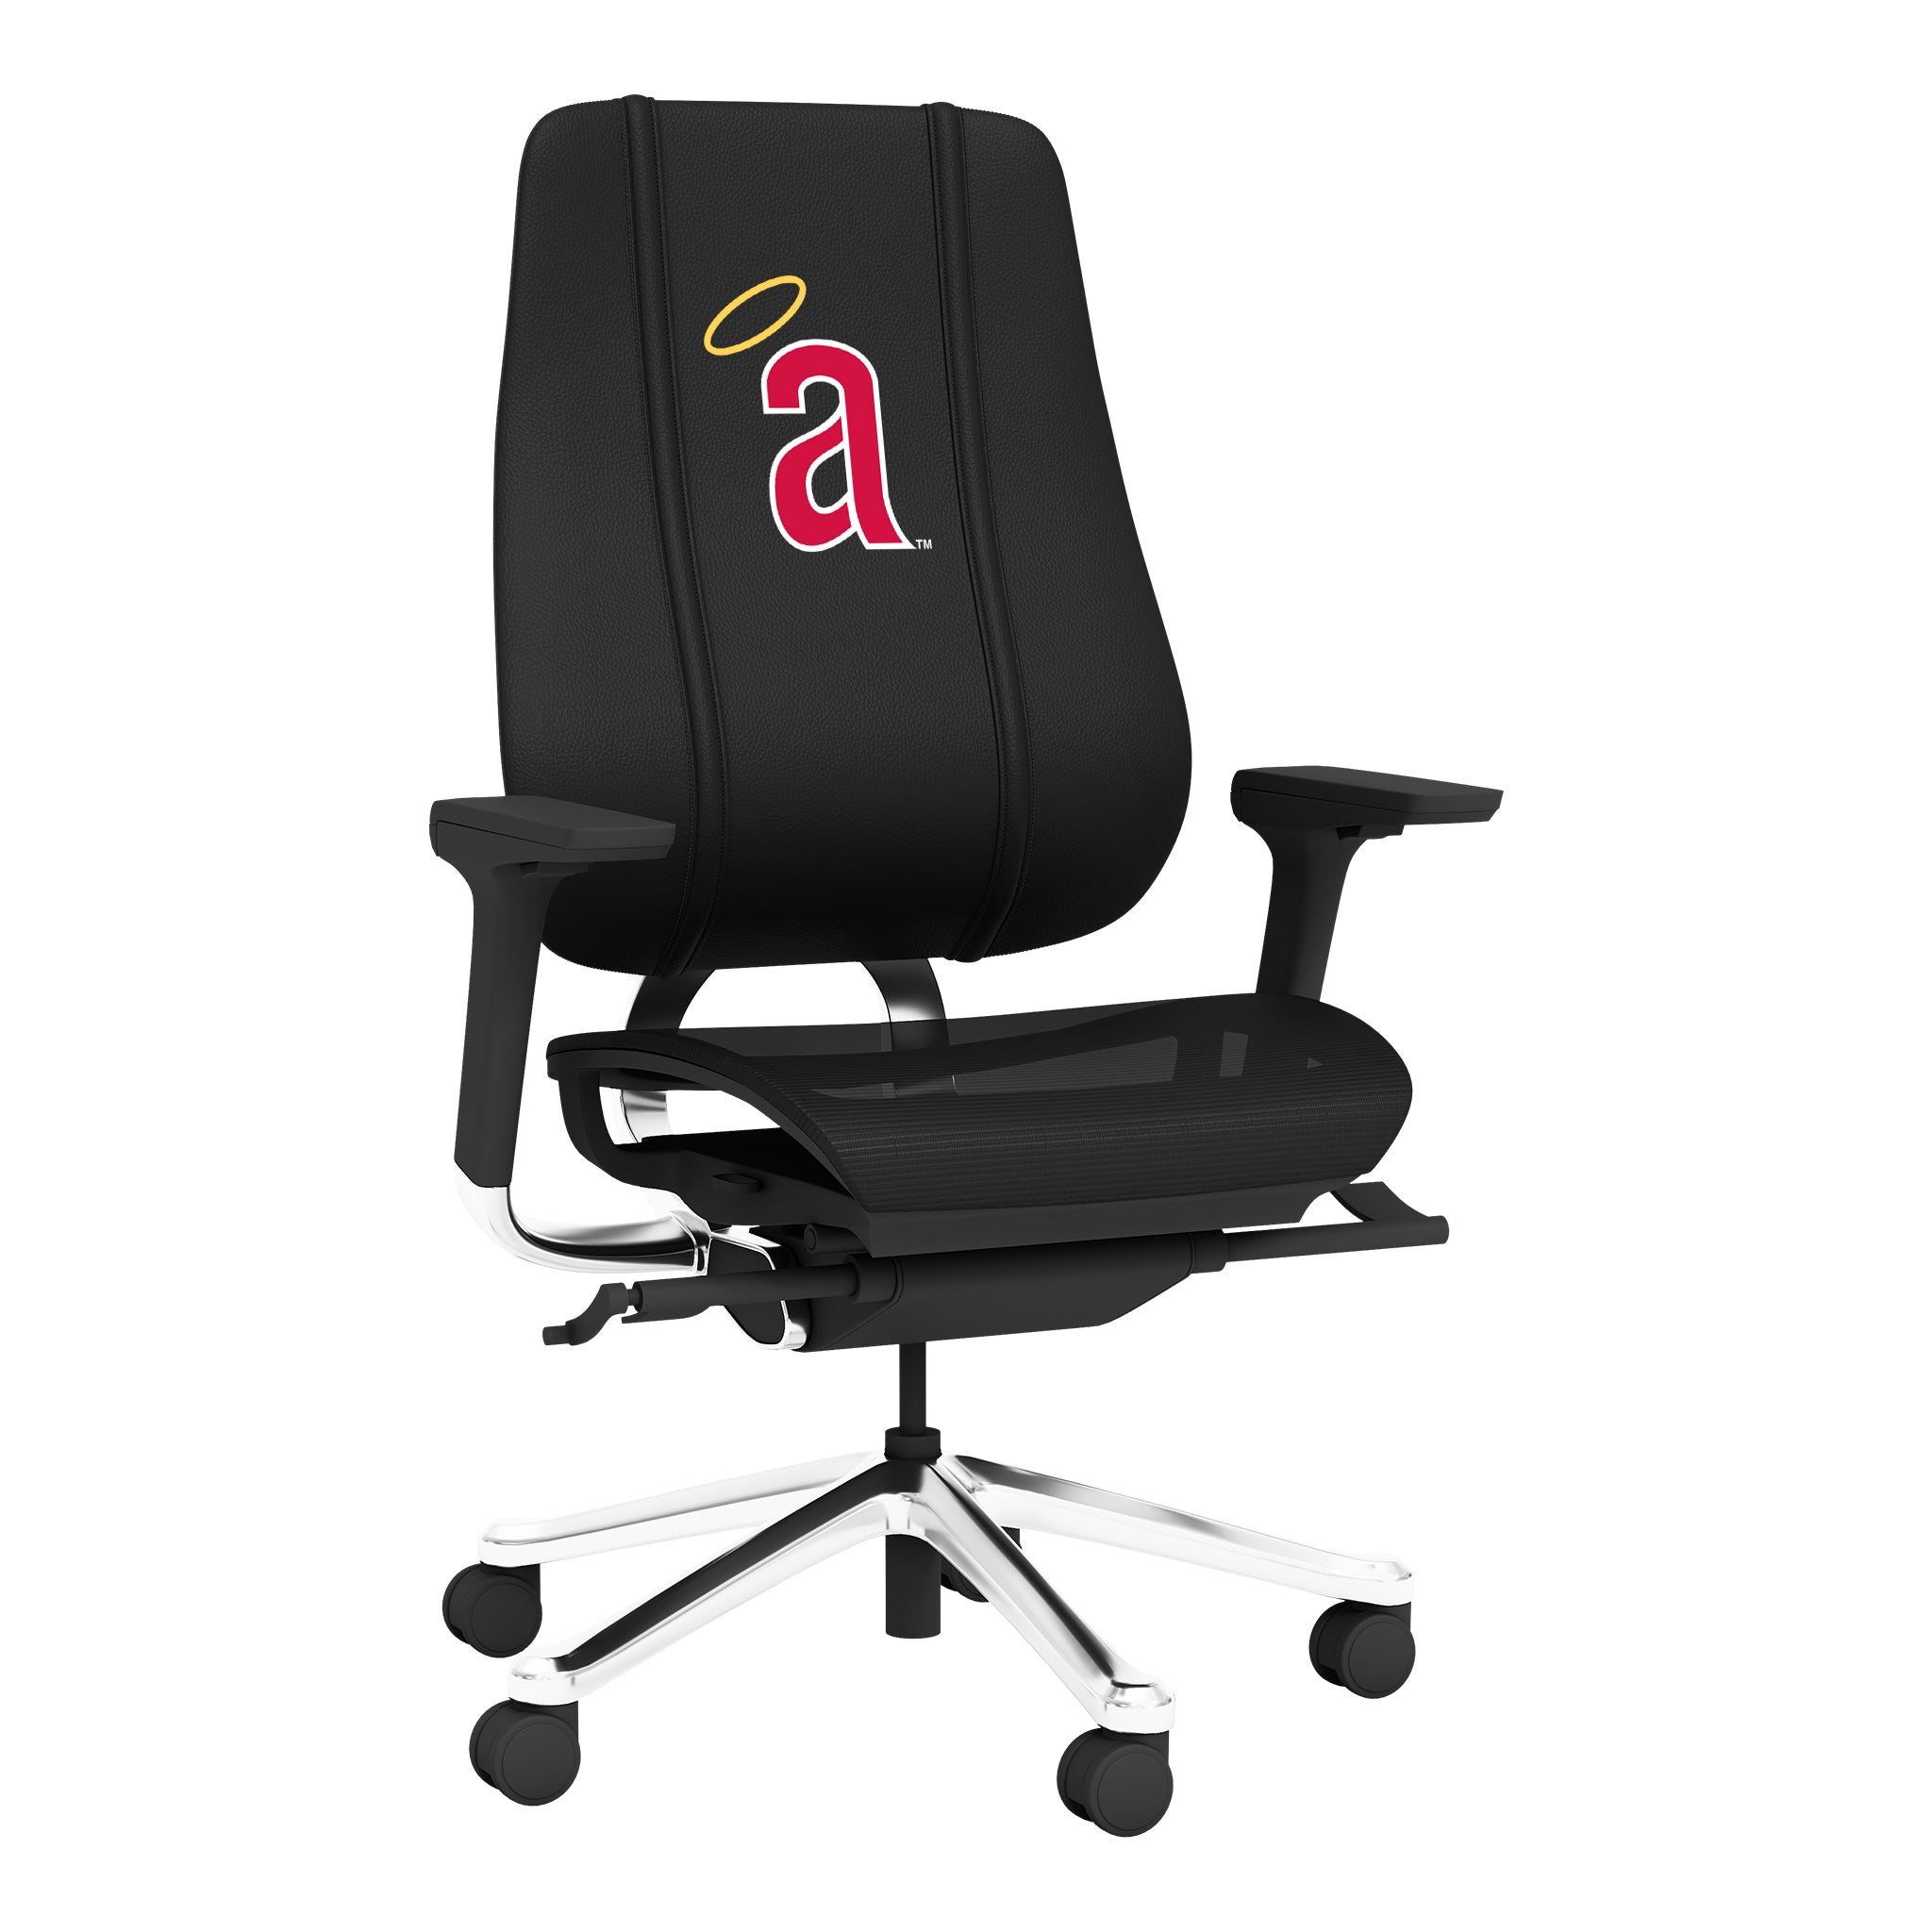 PhantomX Mesh Gaming Chair with California Angels Cooperstown Secondary